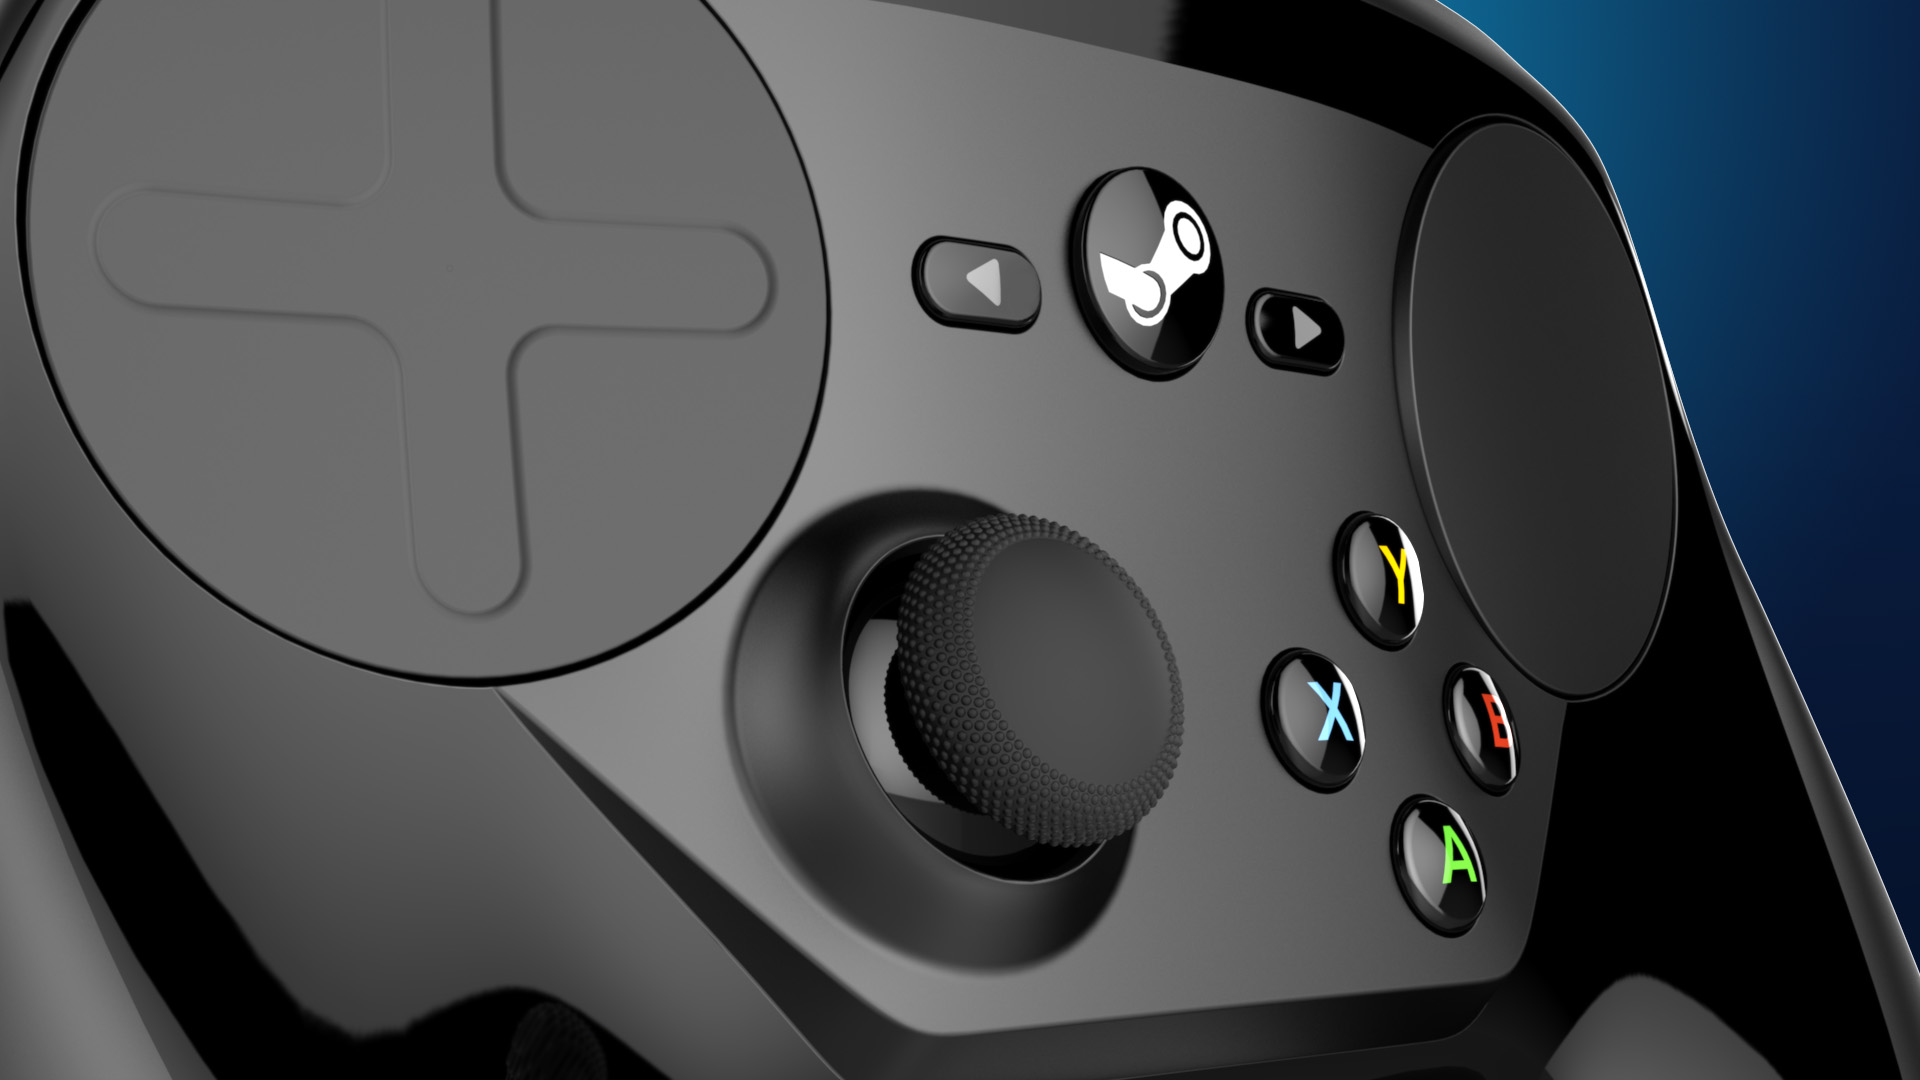 The Steam Controller remains one of the best PC controllers to date.